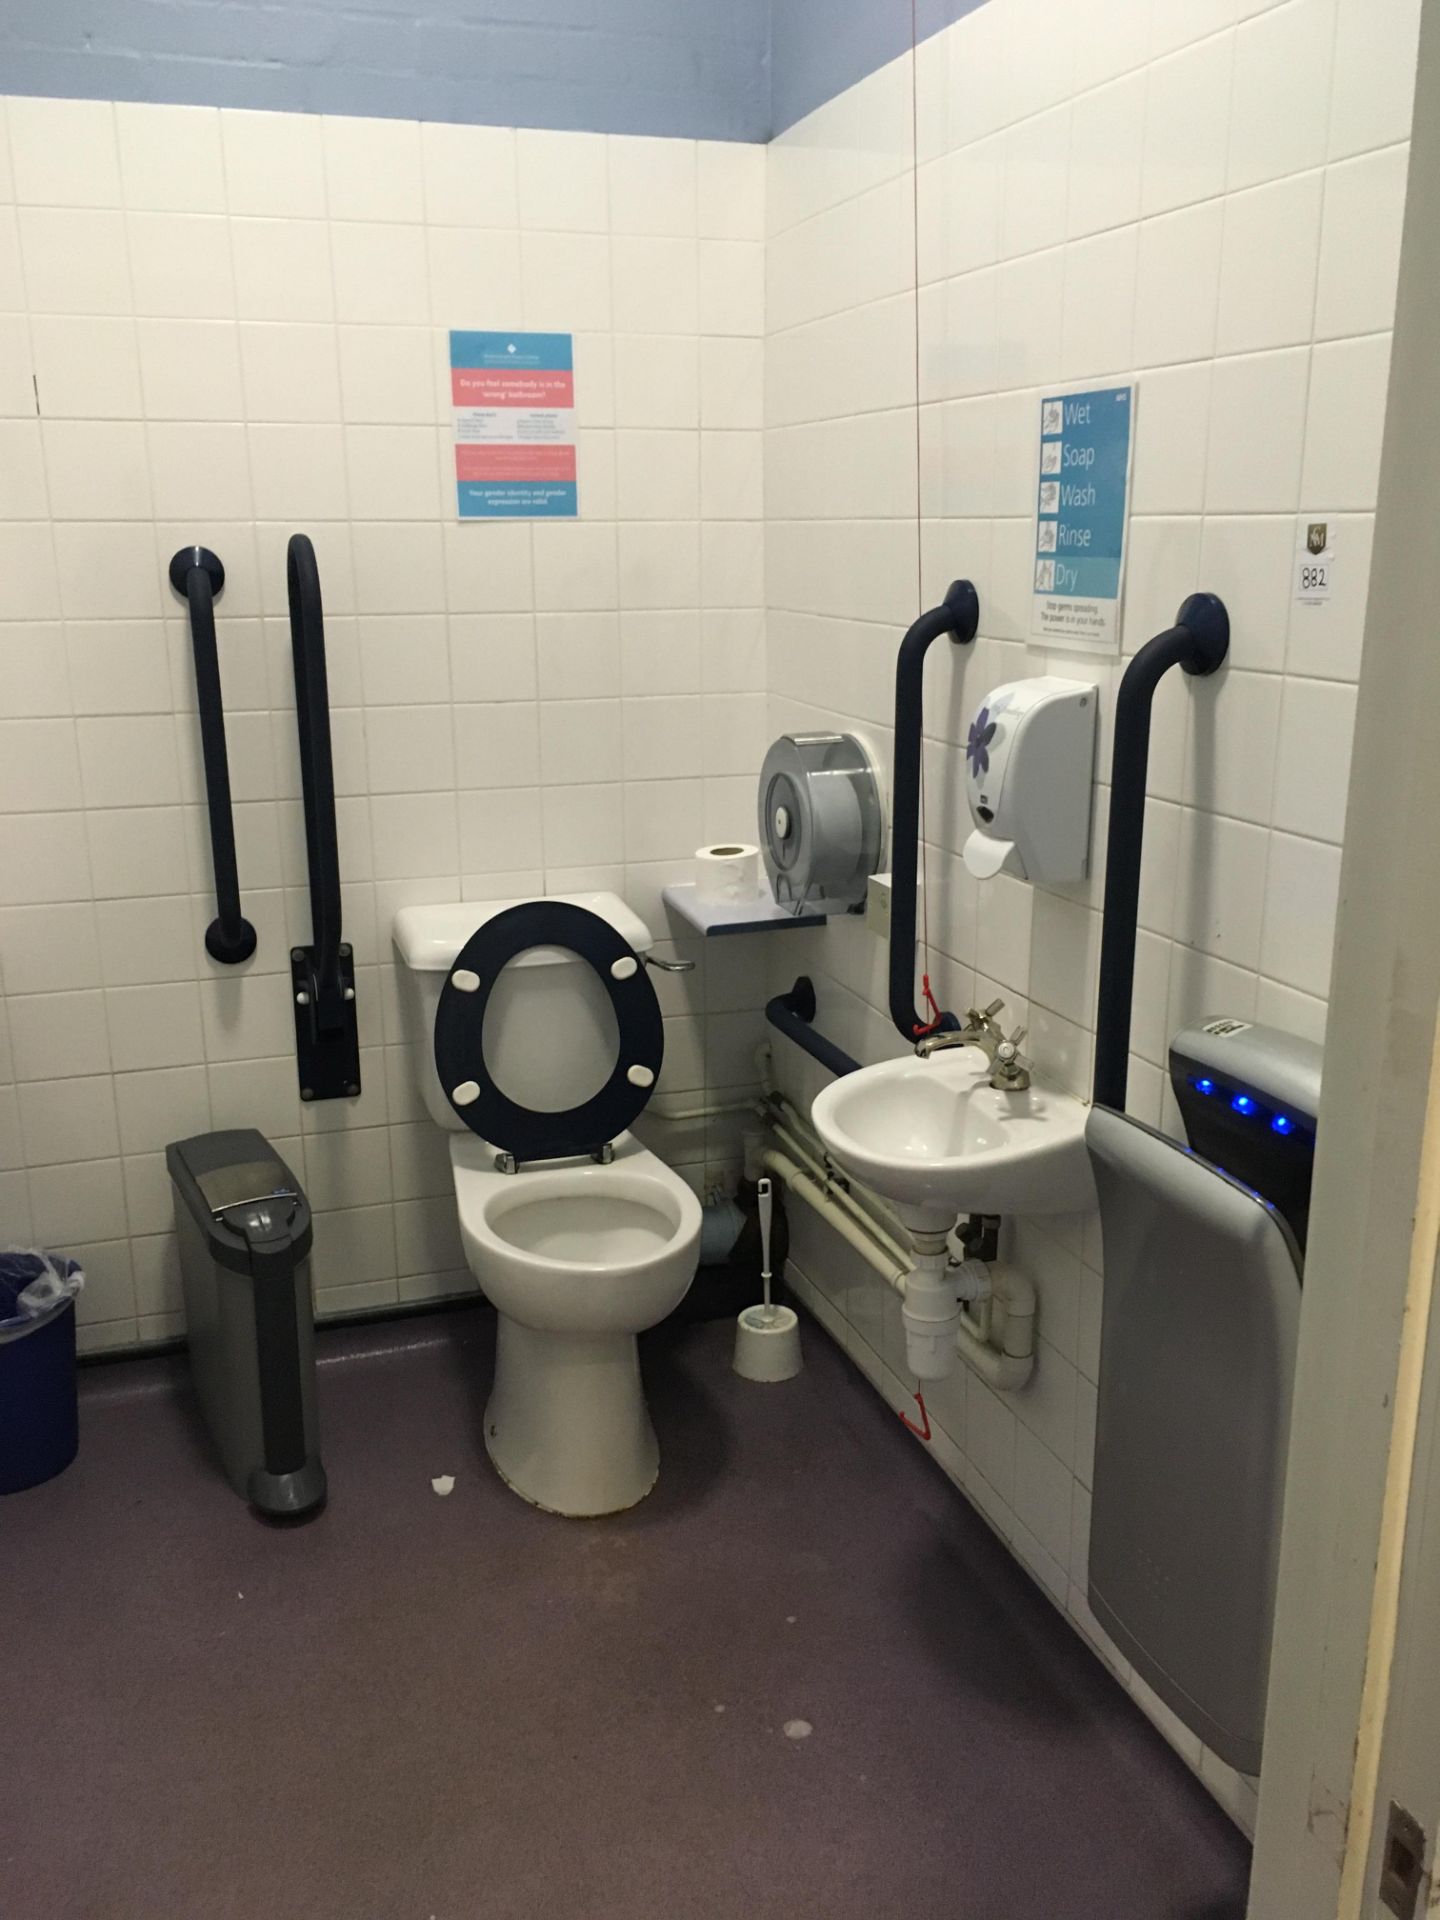 Contents of the disabled toilet, 1 x cubicle, hand drier, mirror, safety rails - Image 2 of 3